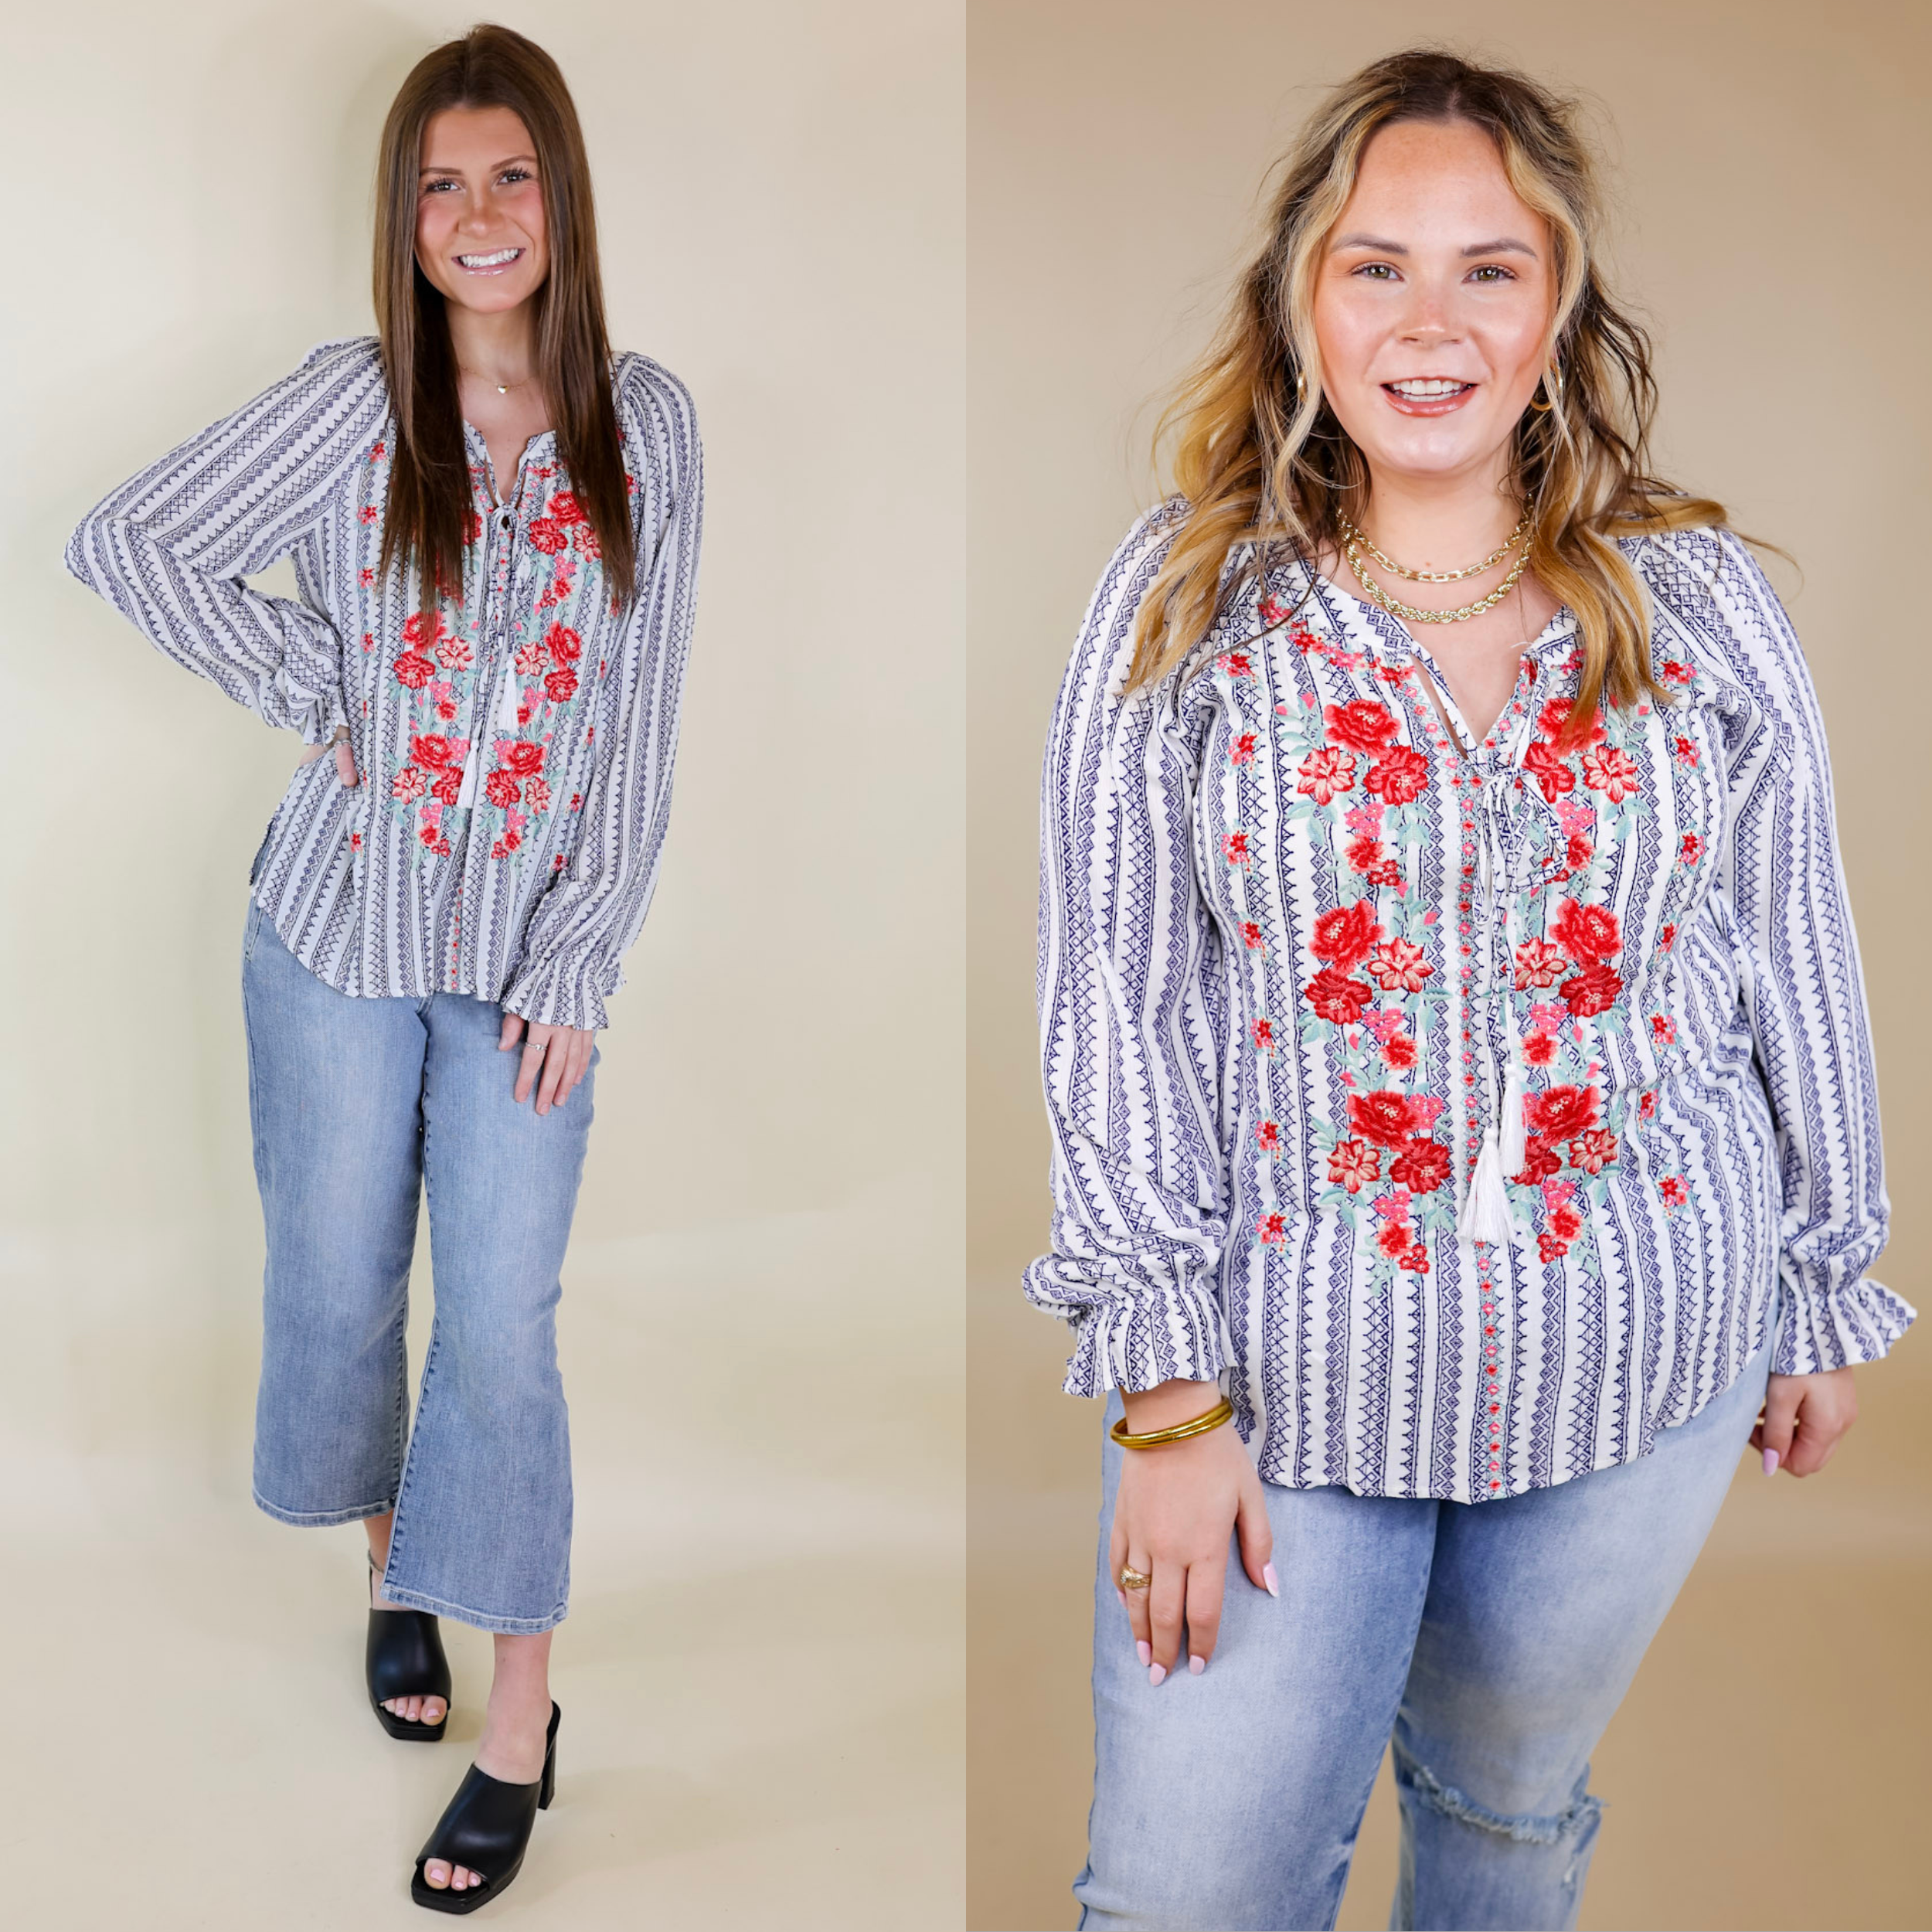 Models are wearing a navy and white striped top with long sleeves, a keyhole and tie neckline, and red floral embroidery. Size small model has it paired with cropped jeans, black heels, and gold jewelry. Size large model has it paired with distressed jeans and gold jewelry.